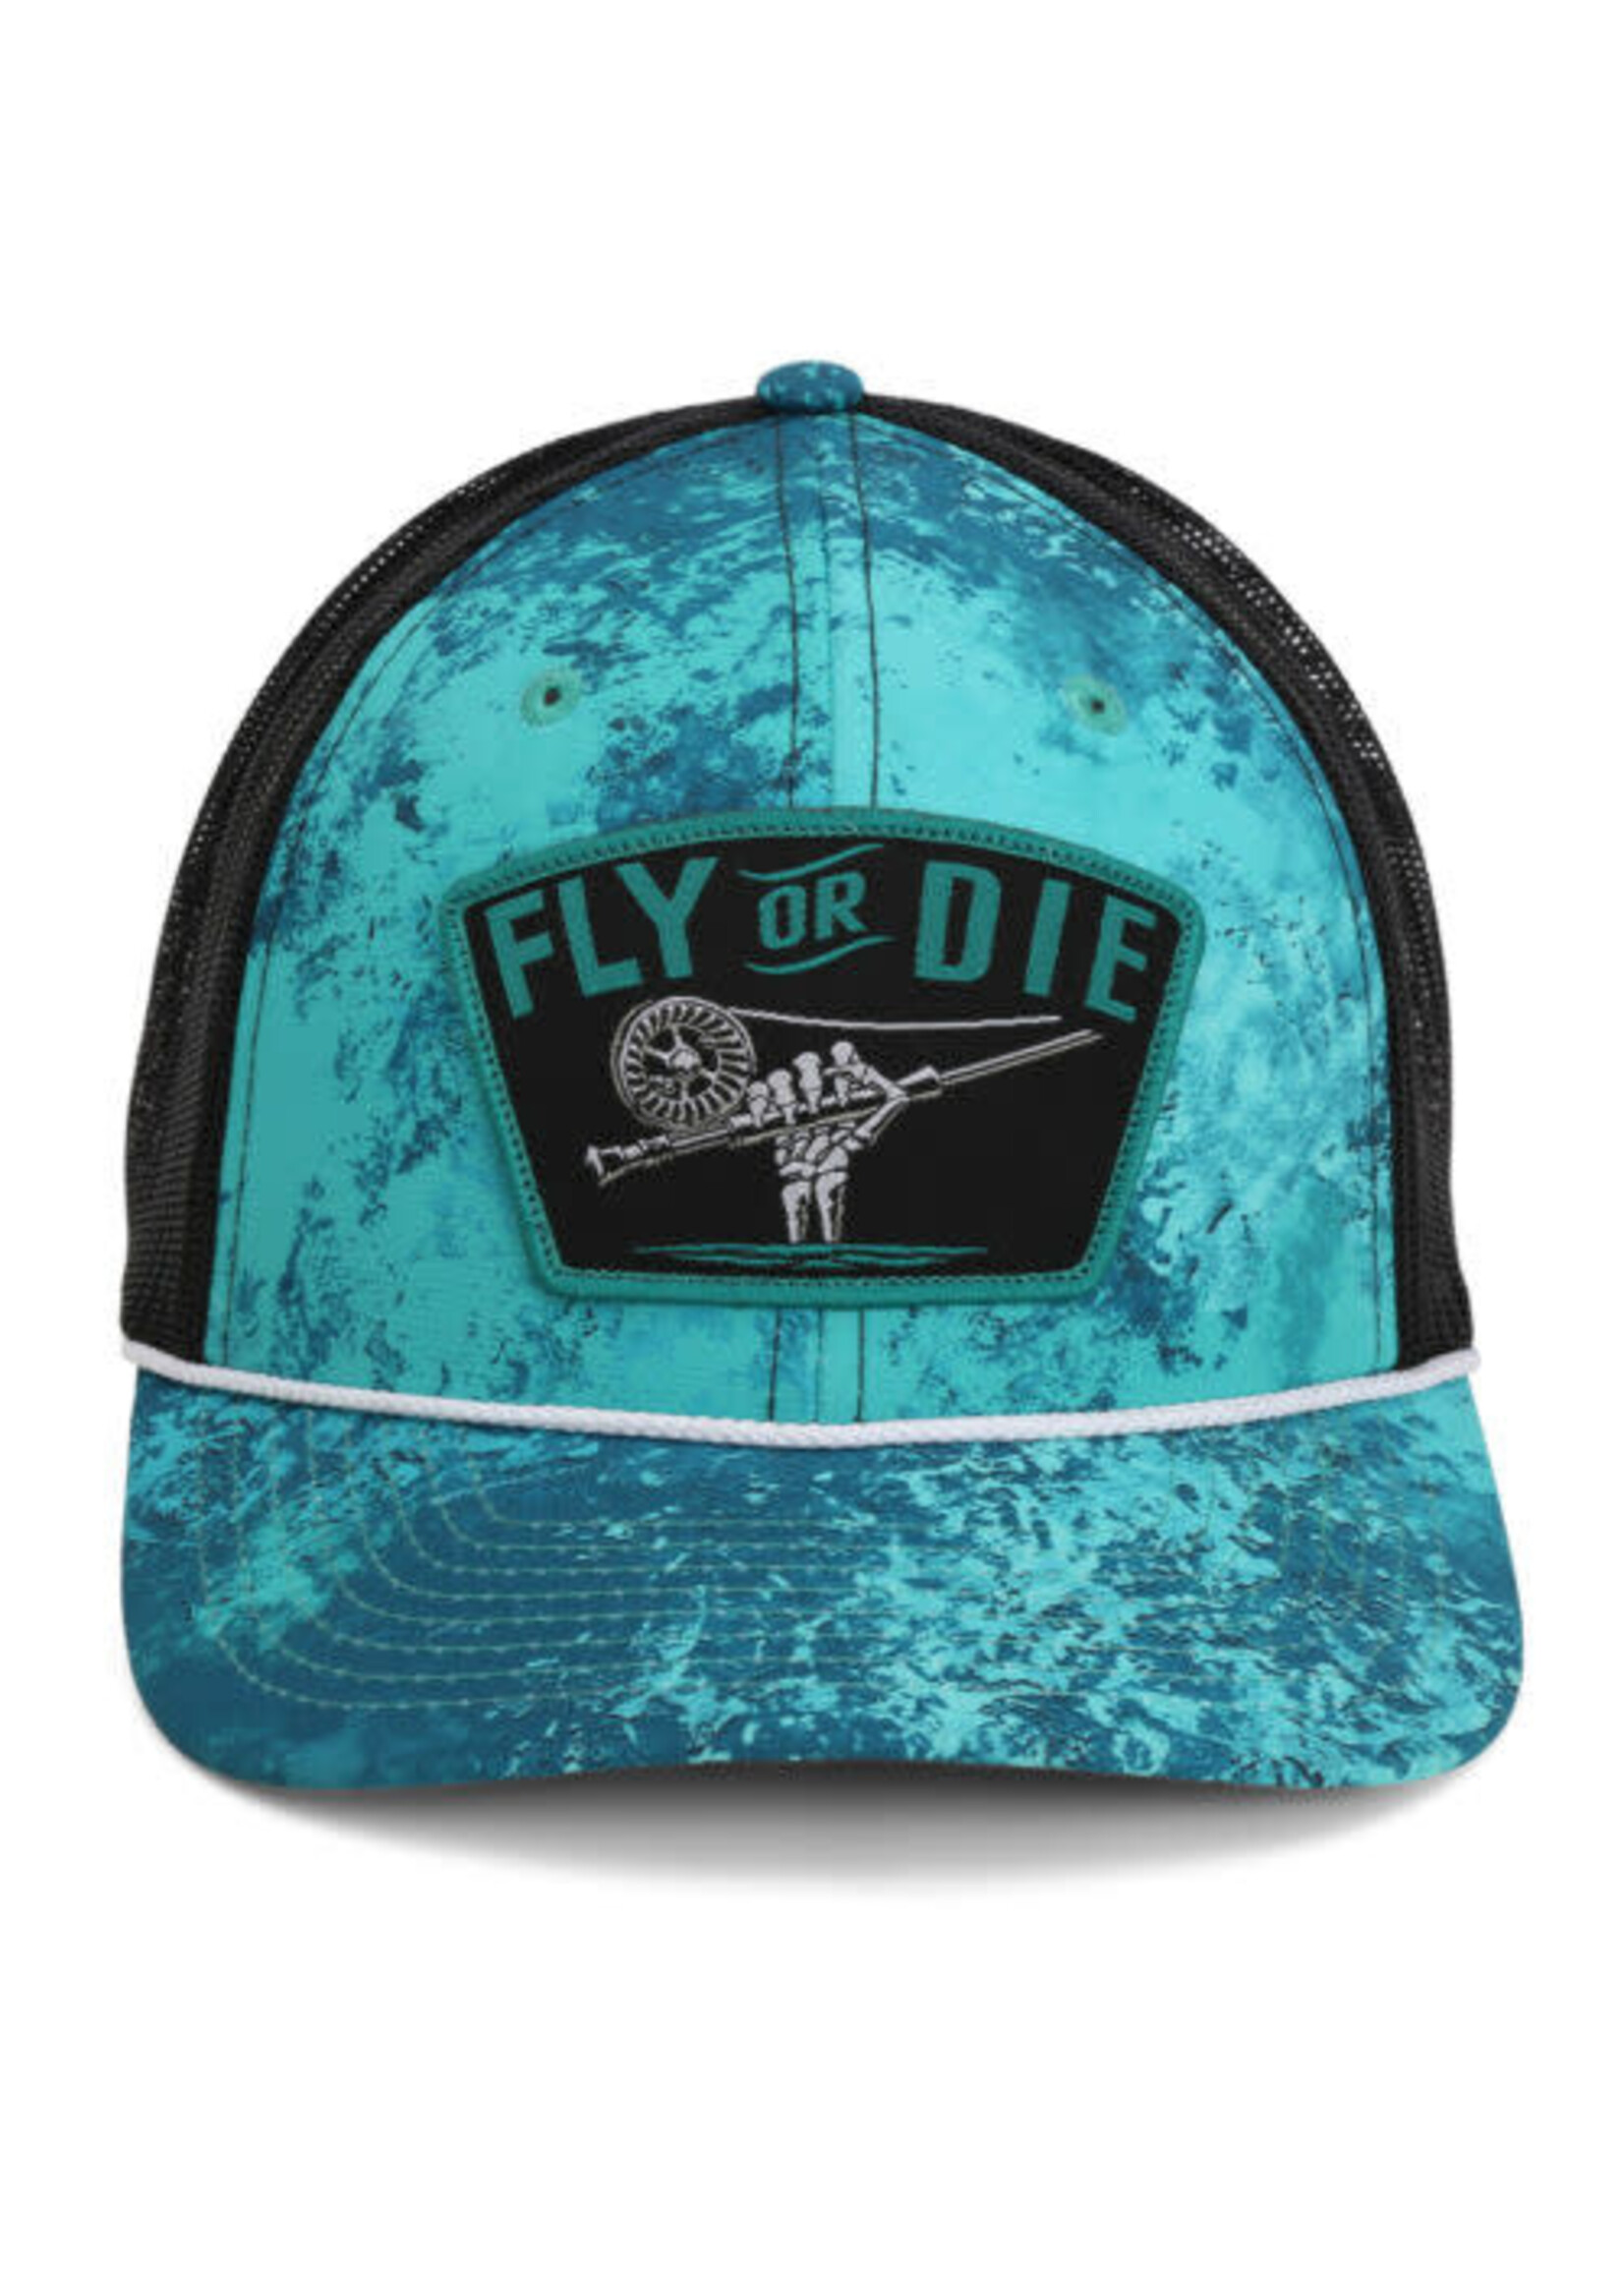 Paramount Paramount Fly or Die Hat Fly Fishing Mesh Back Rope Cap